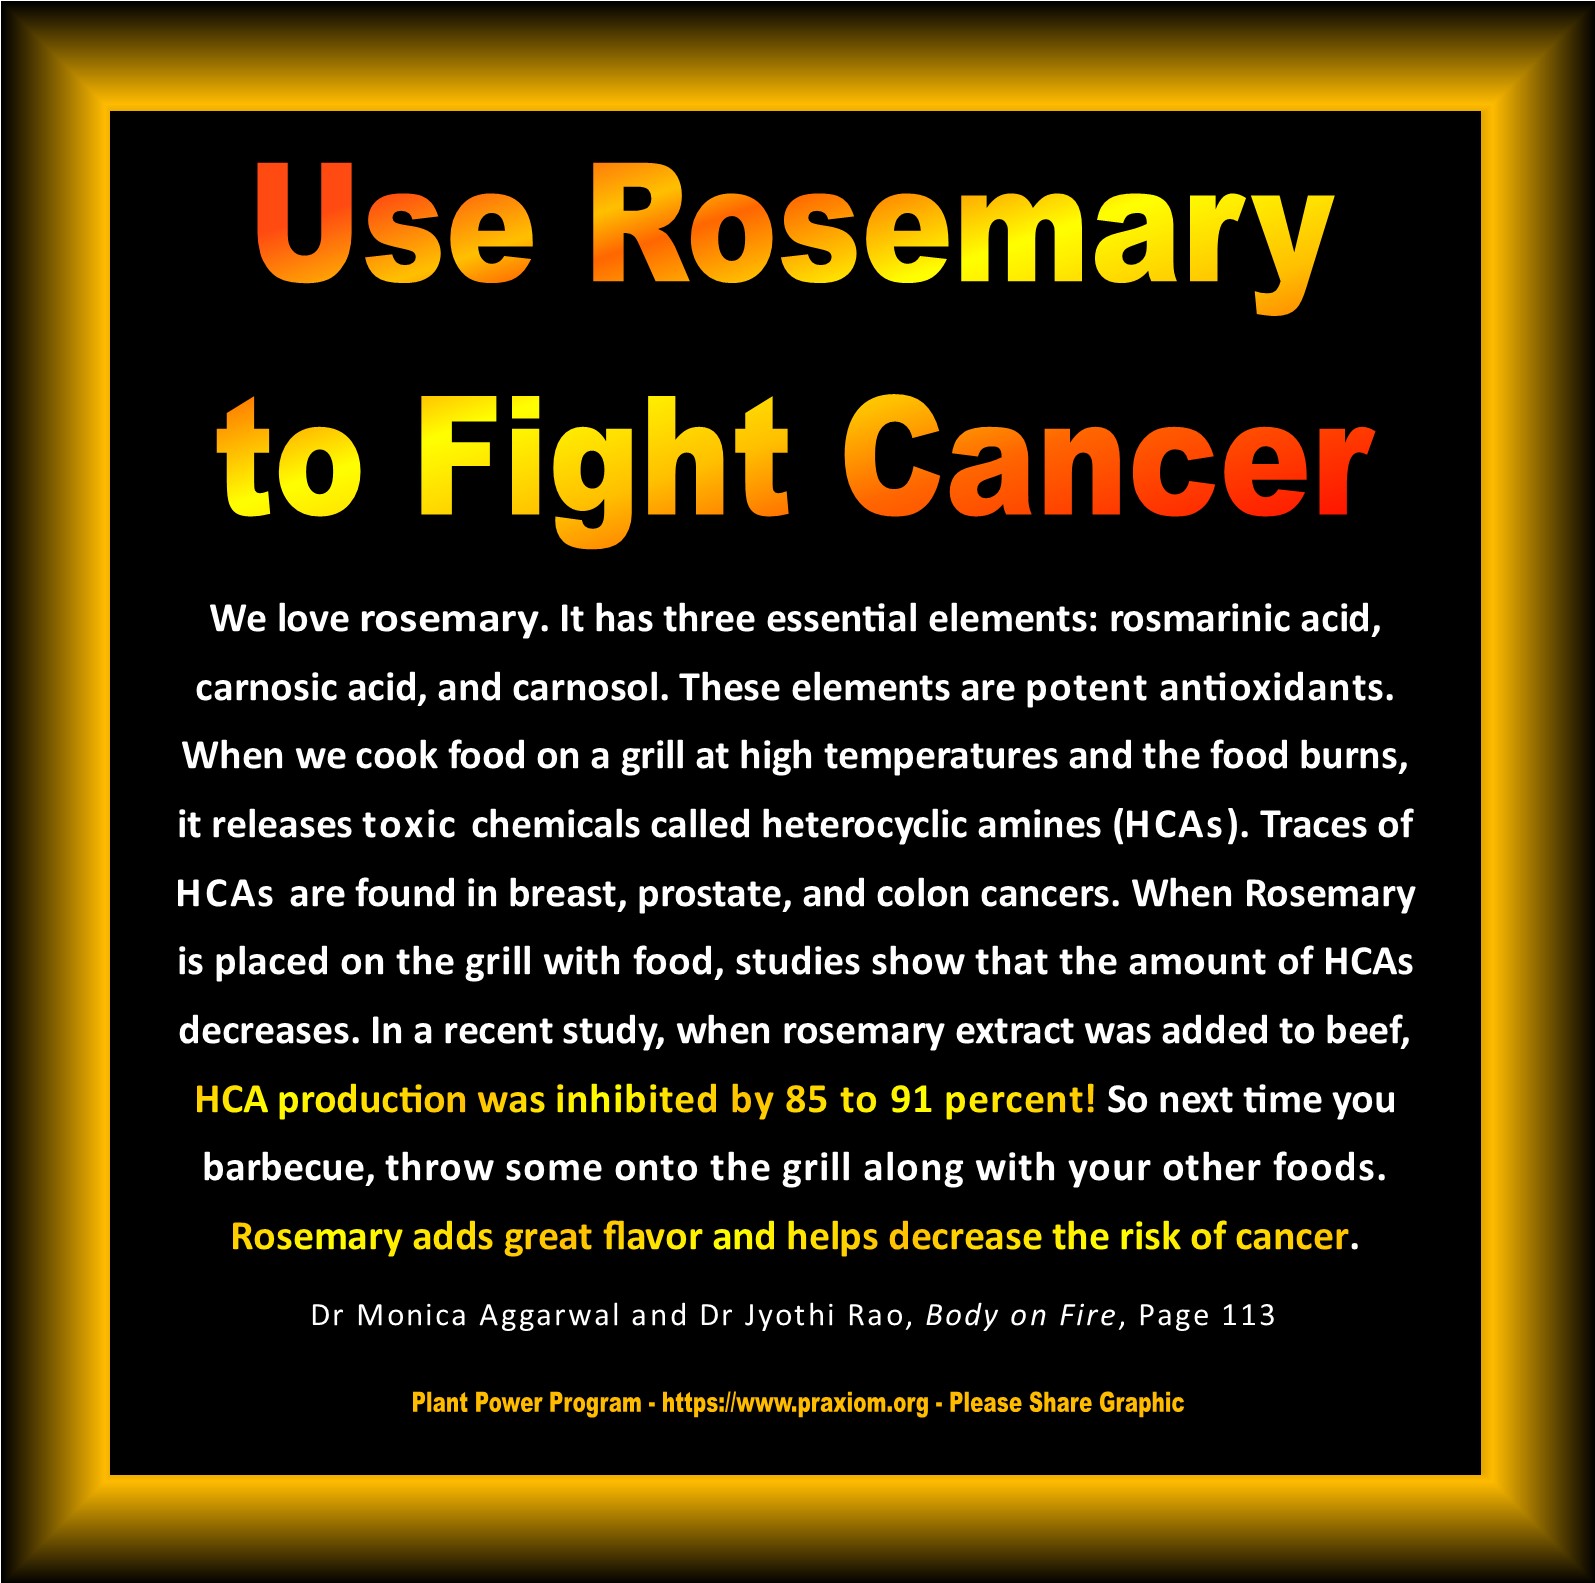 Use Rosemary to Fight Cancer- Drs Aggarwal and Rao